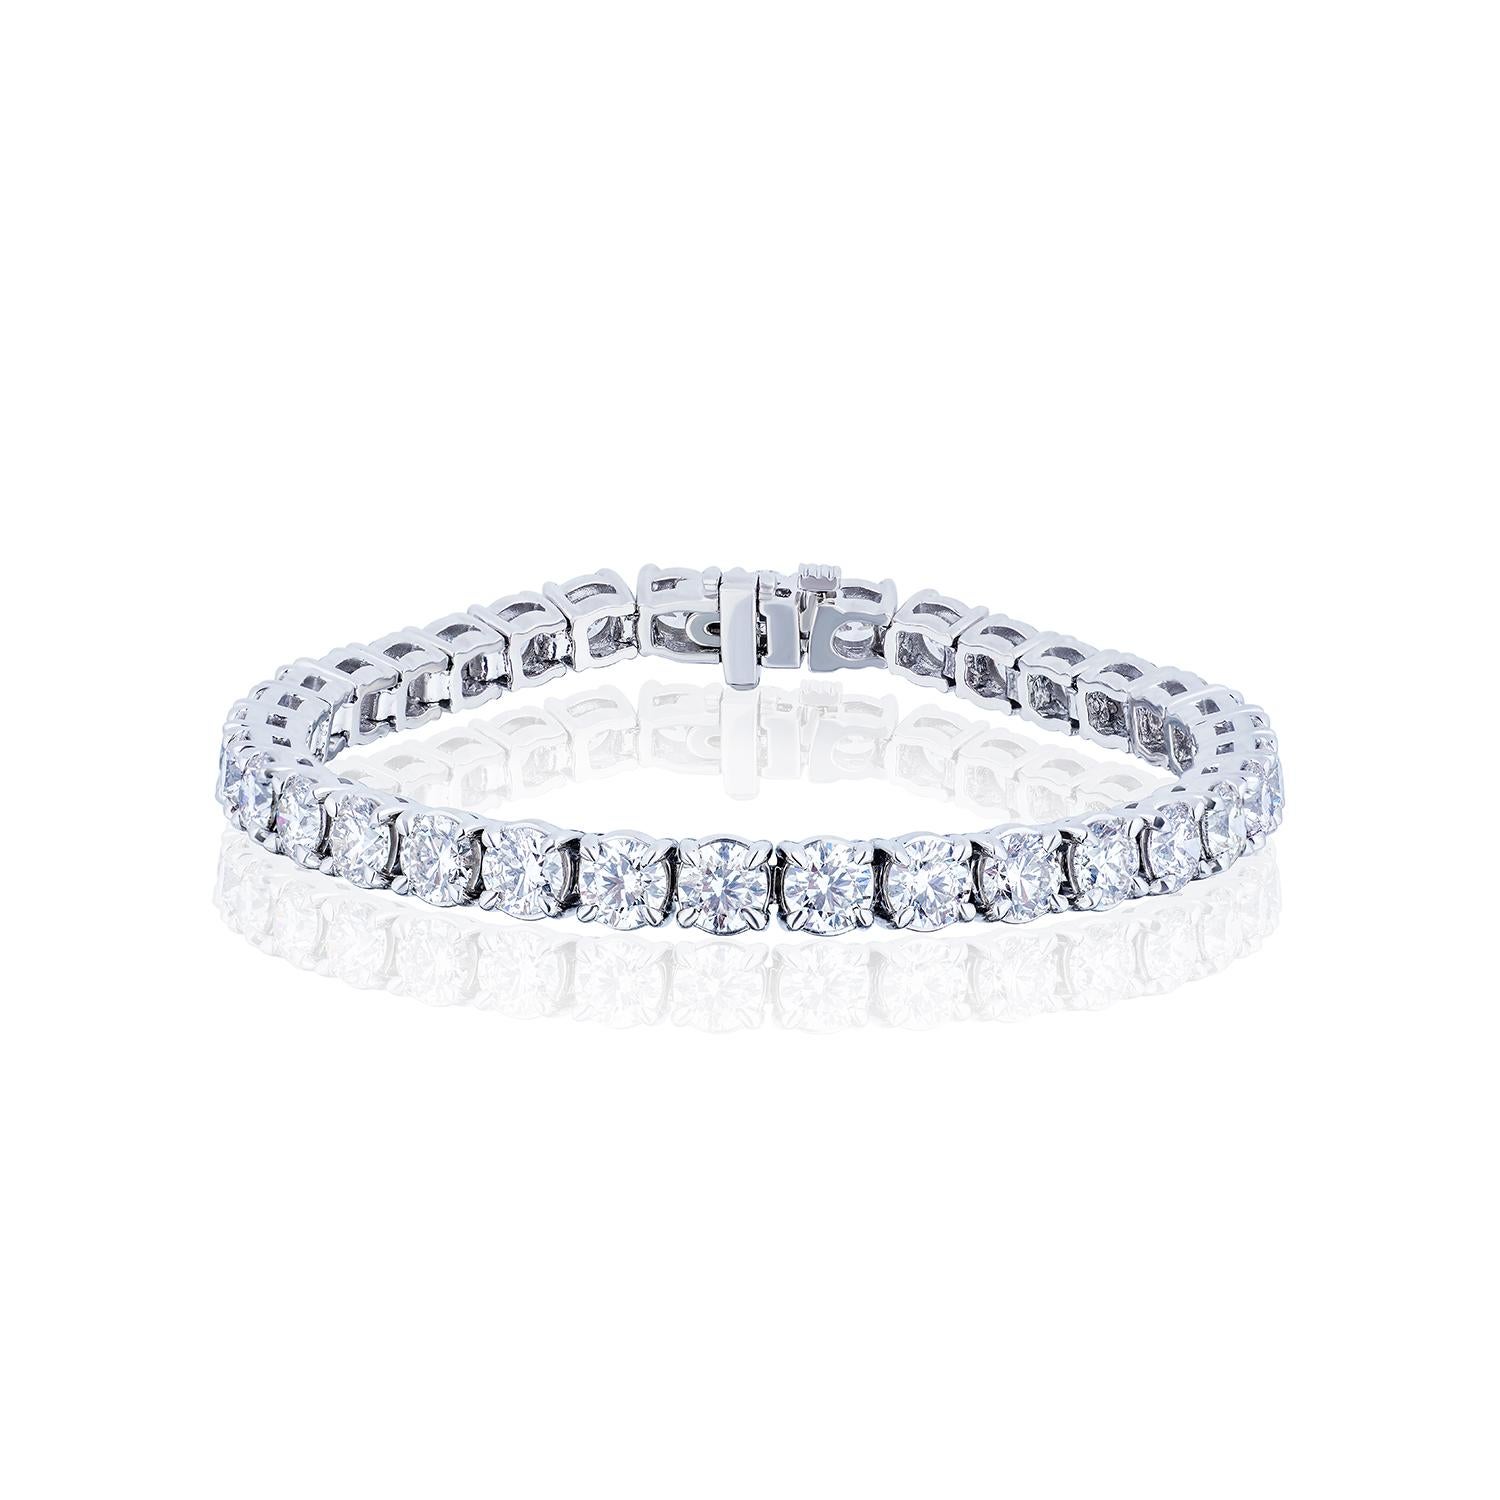 The Perfect Tennis Bracelet.

34 perfectly matched Round Brilliant Diamonds totaling 14.13 Carats in a straight line Bracelet.
Diamonds are H-I color and VS Clarity.
Set in Platinum.
7 inches.